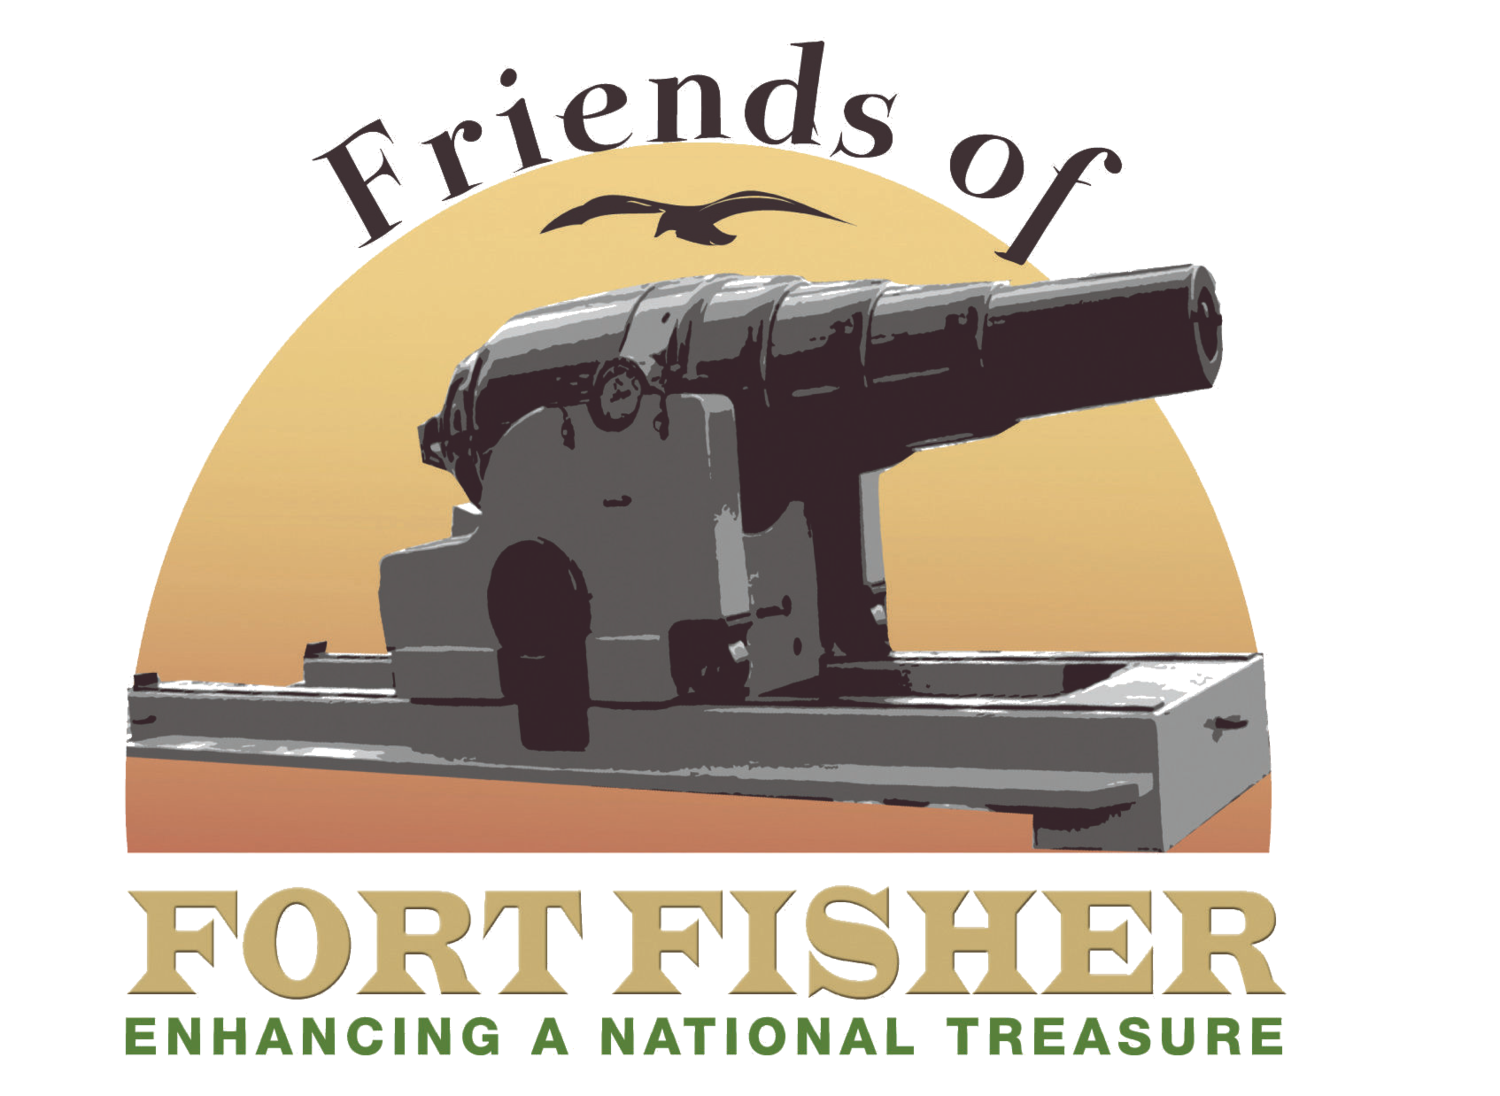 Friends of Fort Fisher